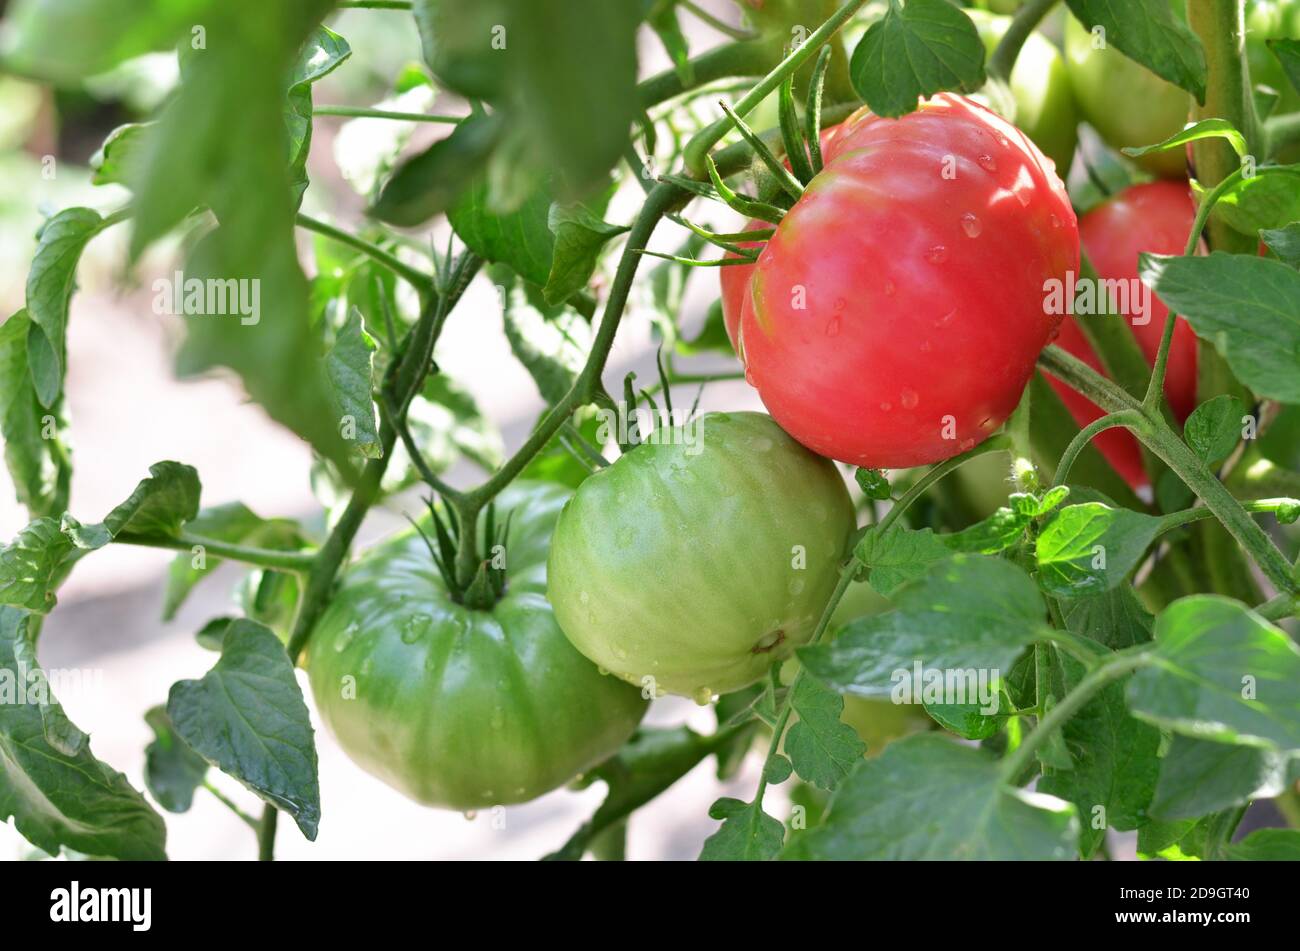 Tomatoes of varying ripeness grow in the garden. Close-up Stock Photo